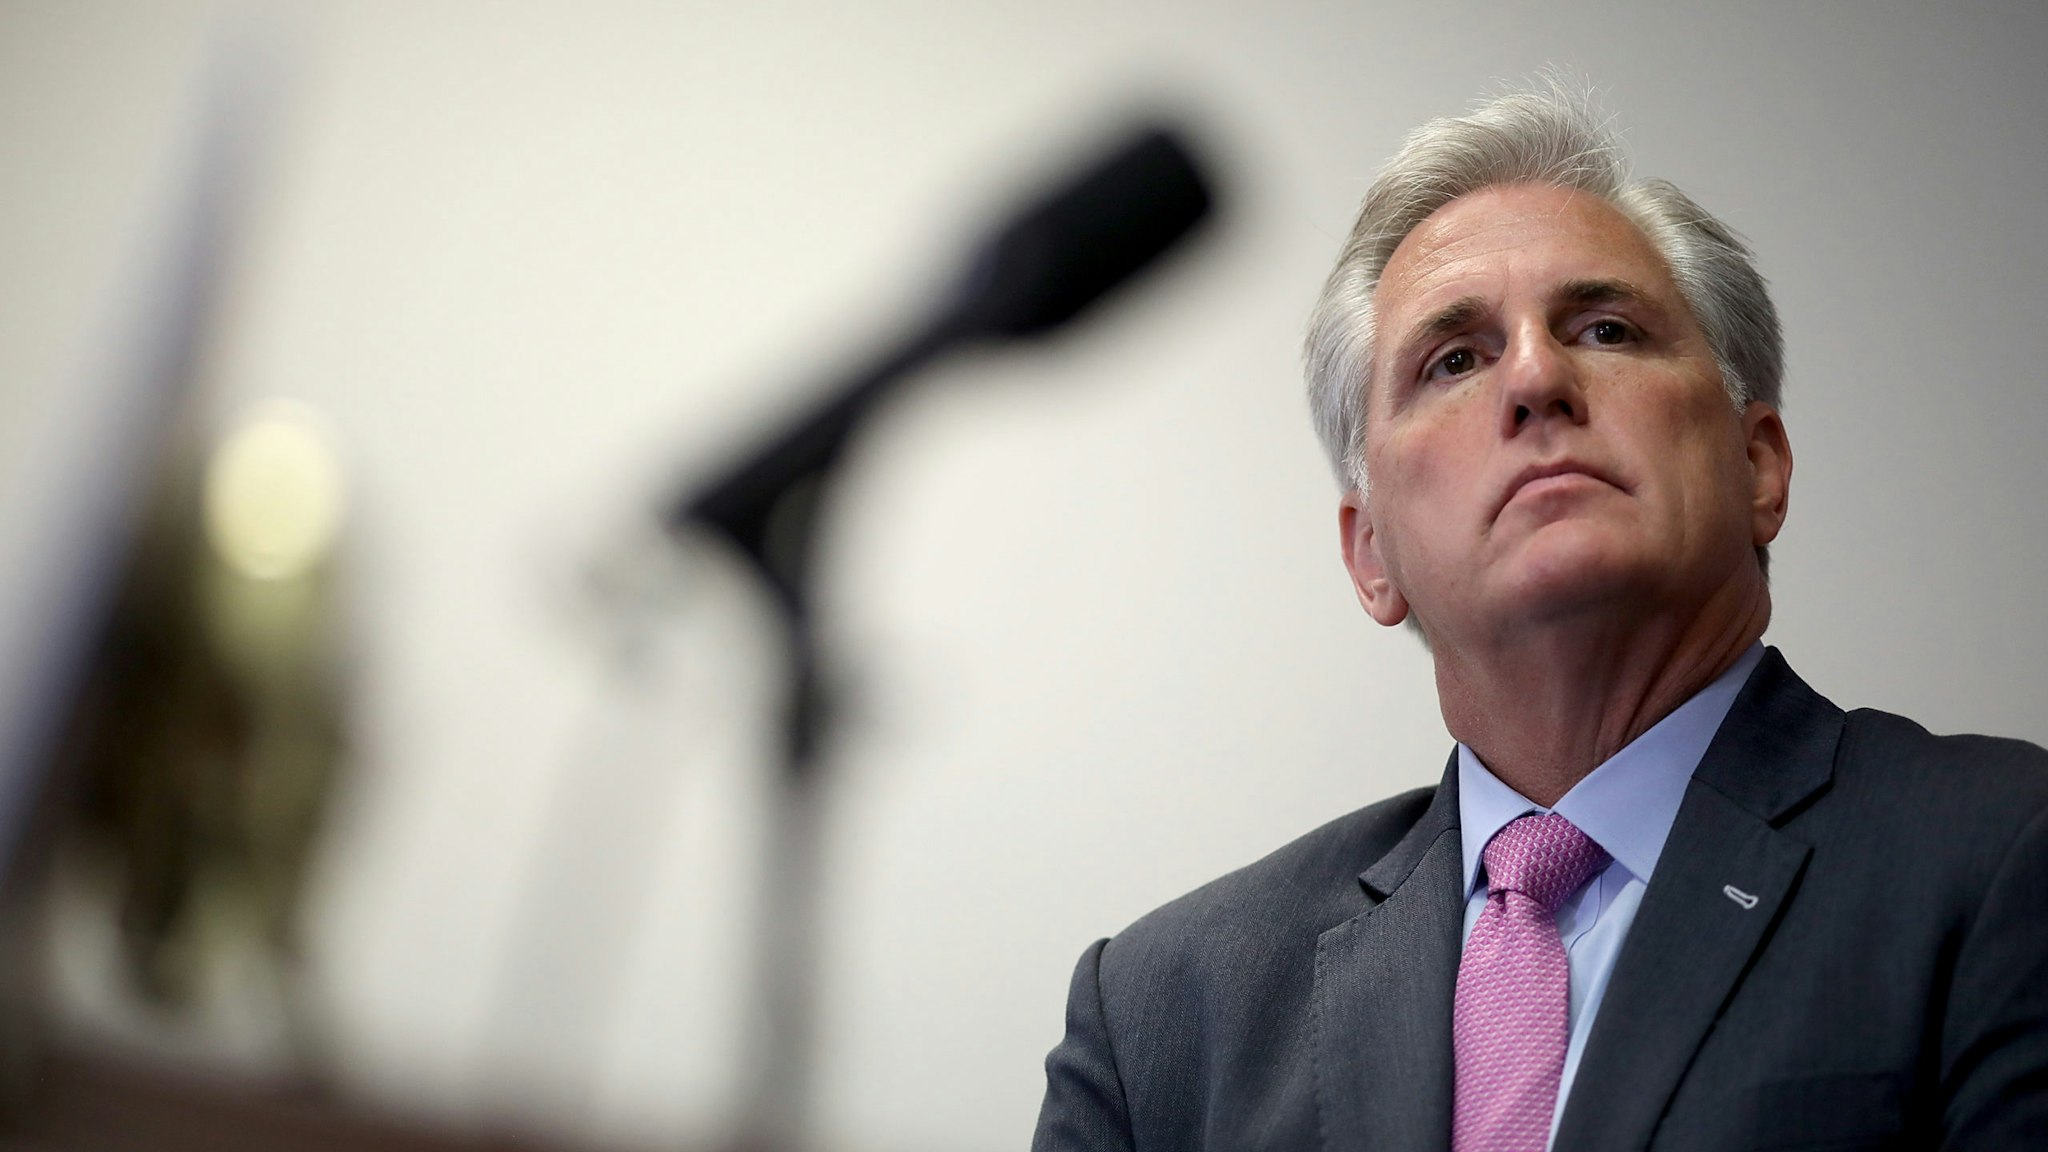 WASHINGTON, DC - JULY 24: House Majority Leader Kevin McCarthy (R-CA) participates in a weekly press conference with Republican House leaders at the U.S. Capitol July 24, 2018 in Washington, DC. When asked about U.S. President Donald Trump's threat of revoking security privileges of political opponents, Speaker of the House Paul Ryan said he thought Trump was "trolling" his political opponents. (Photo by Win McNamee/Getty Images)